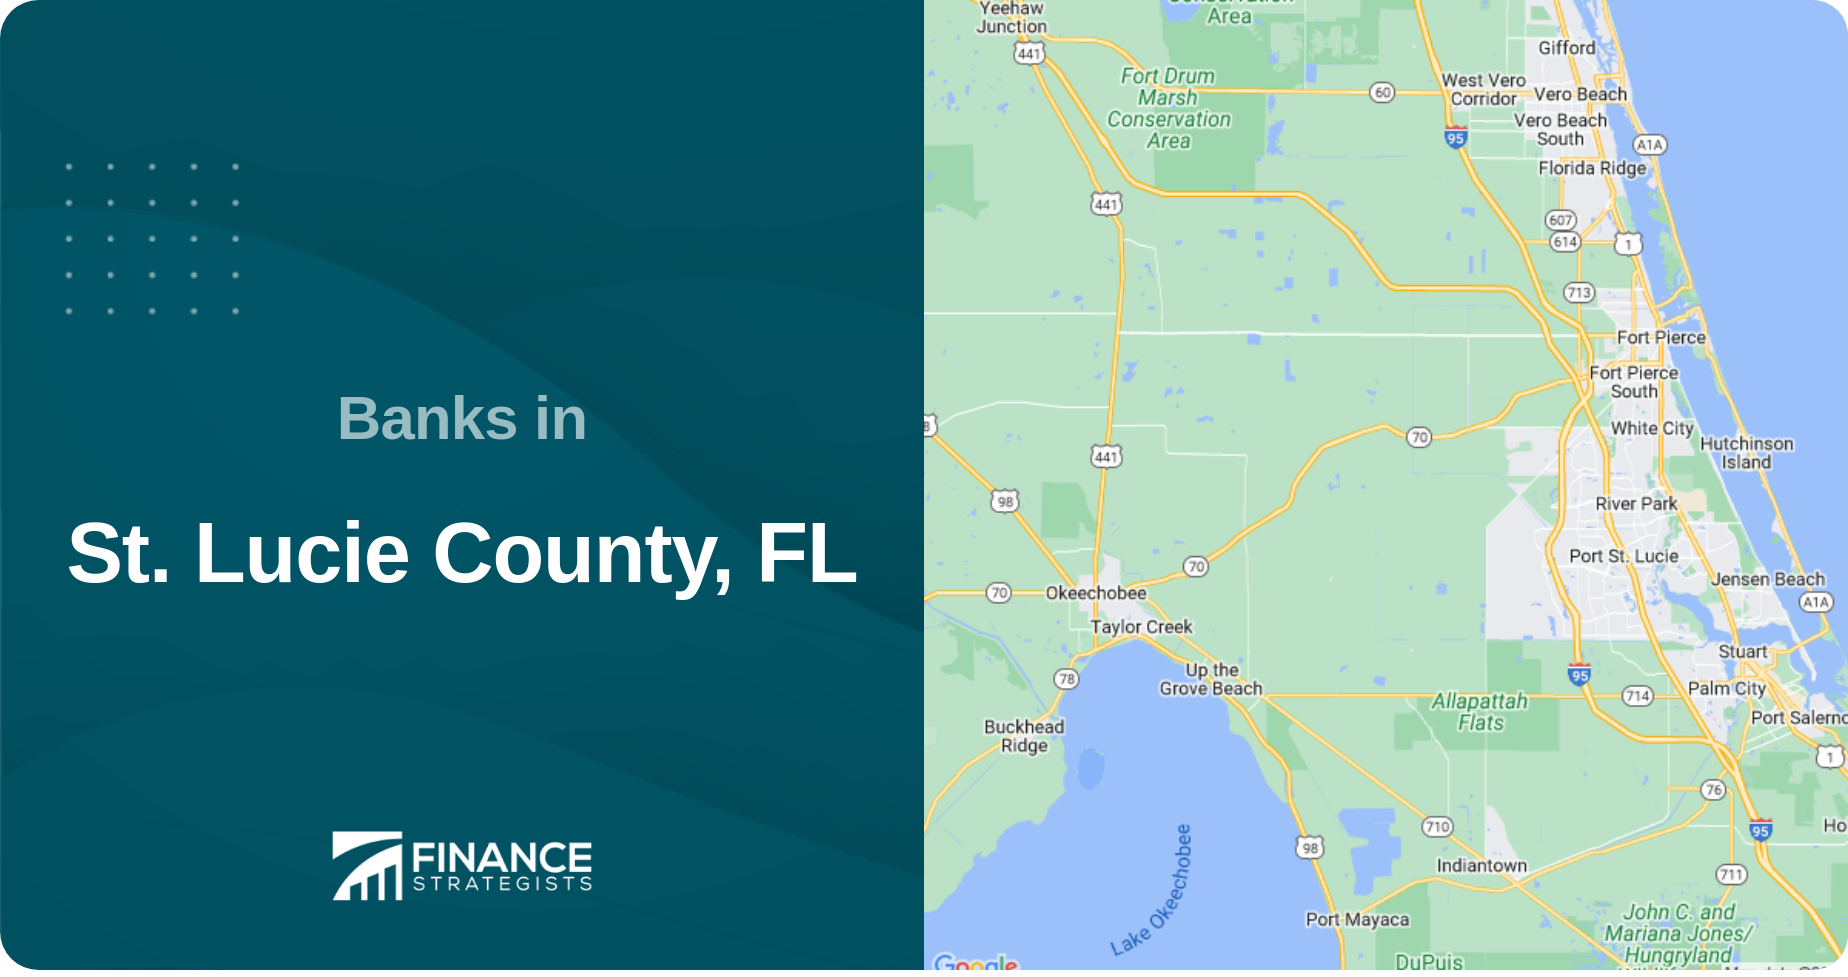 Banks in St. Lucie County, FL